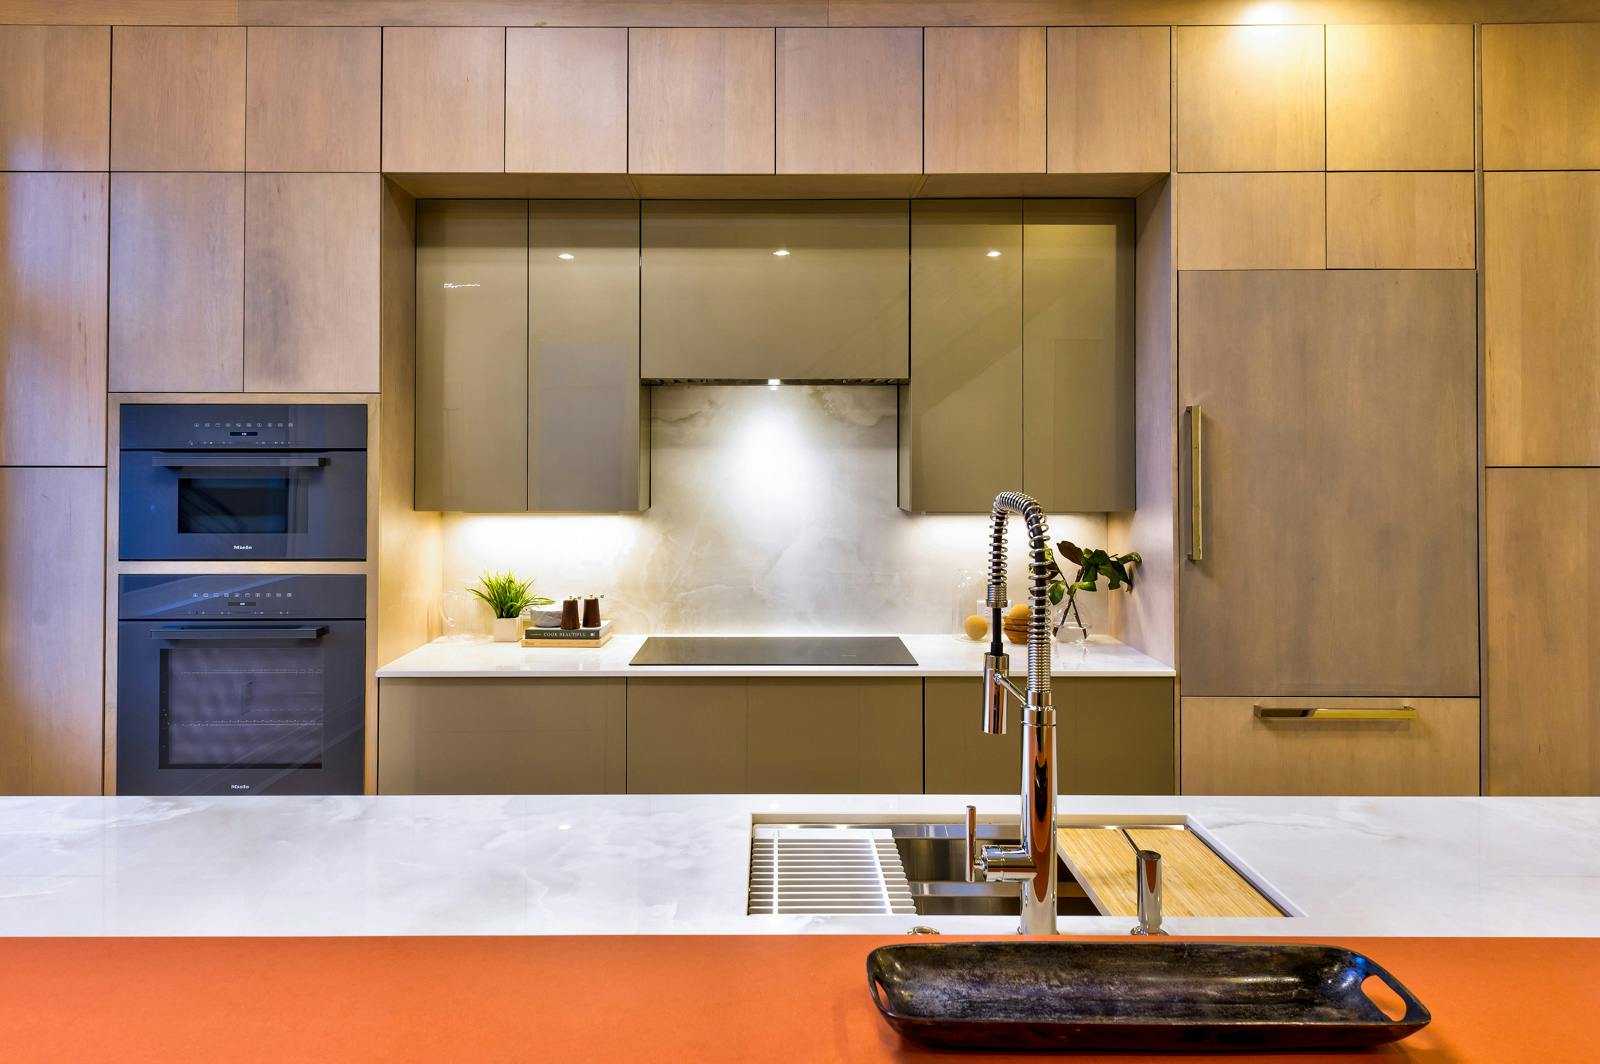 Numéro d'image 36 de la section actuelle de The countertop from Cosentino completes the expression in the kitchen de Cosentino France